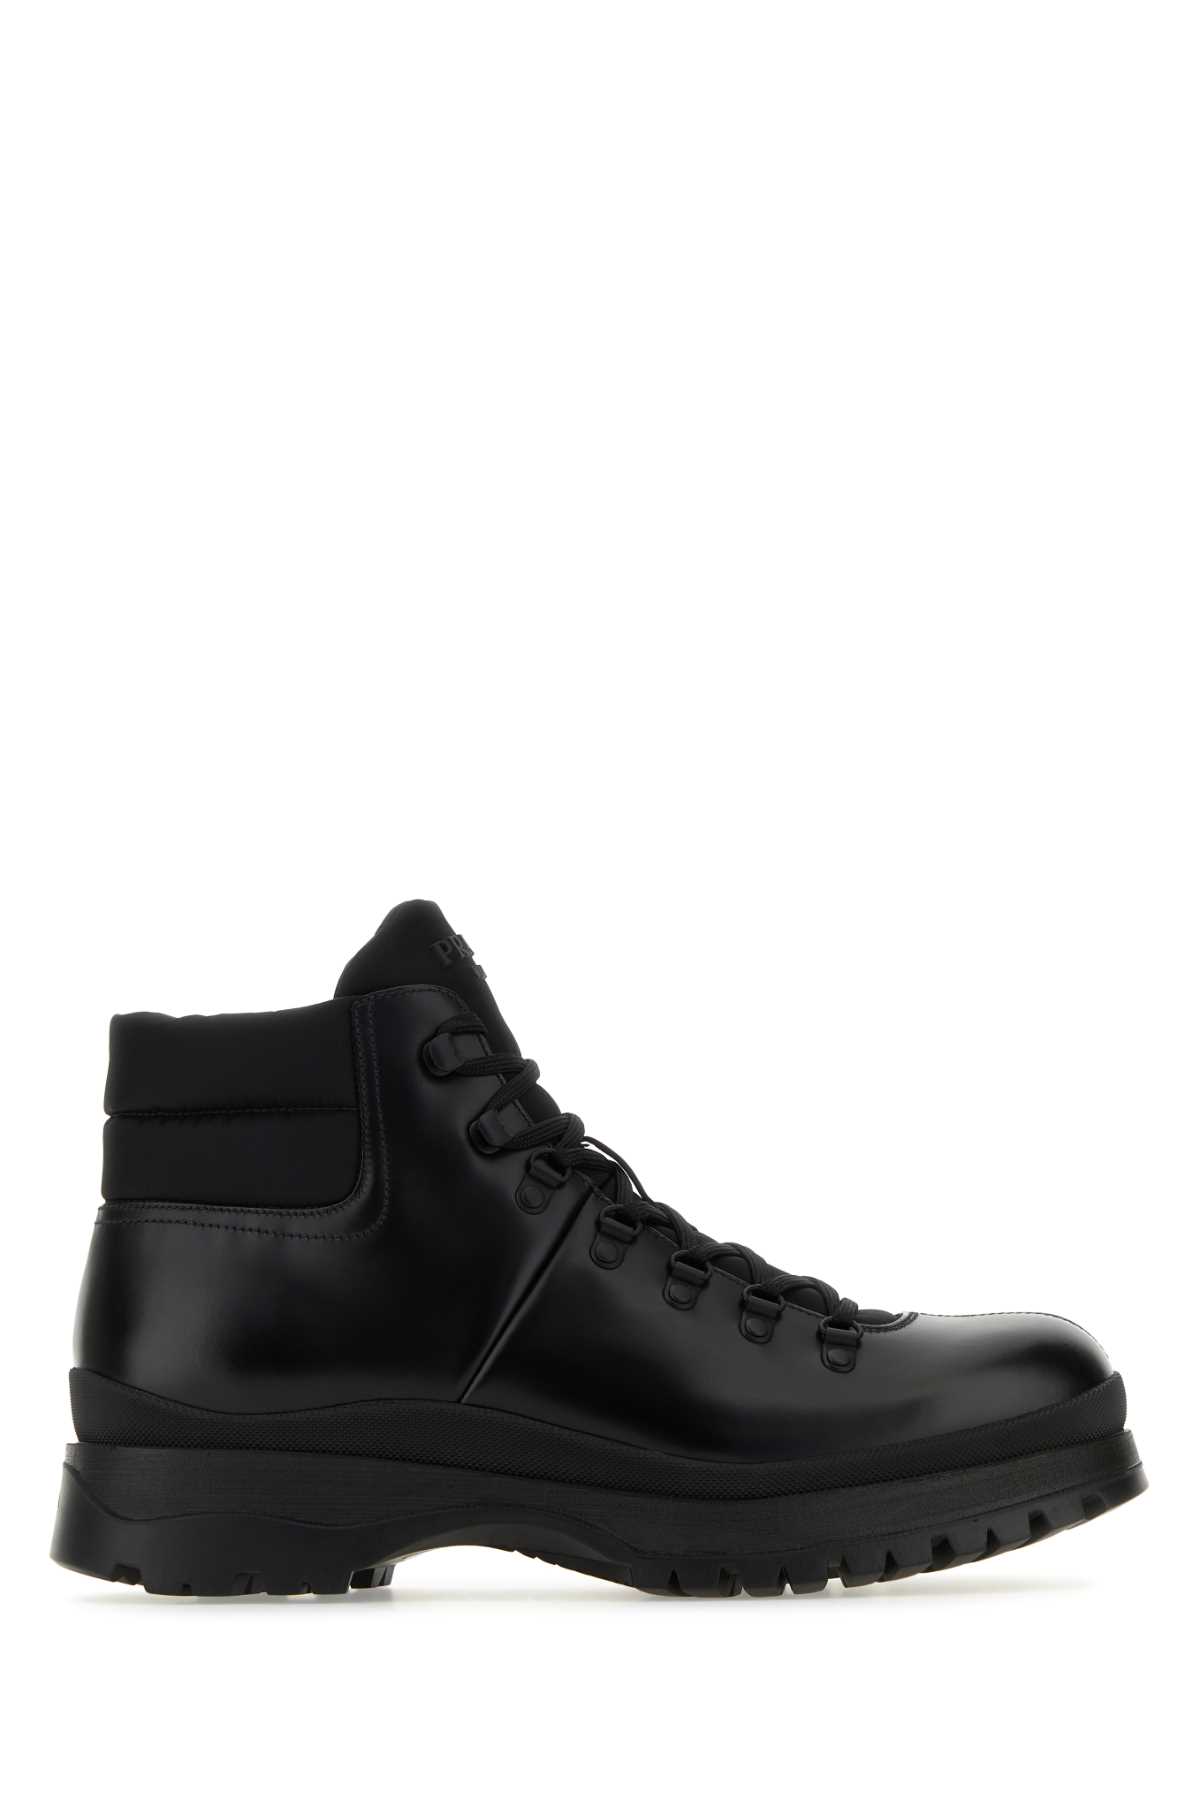 Shop Prada Black Re-nylon And Leather Brixxen Ankle Boots In F0002